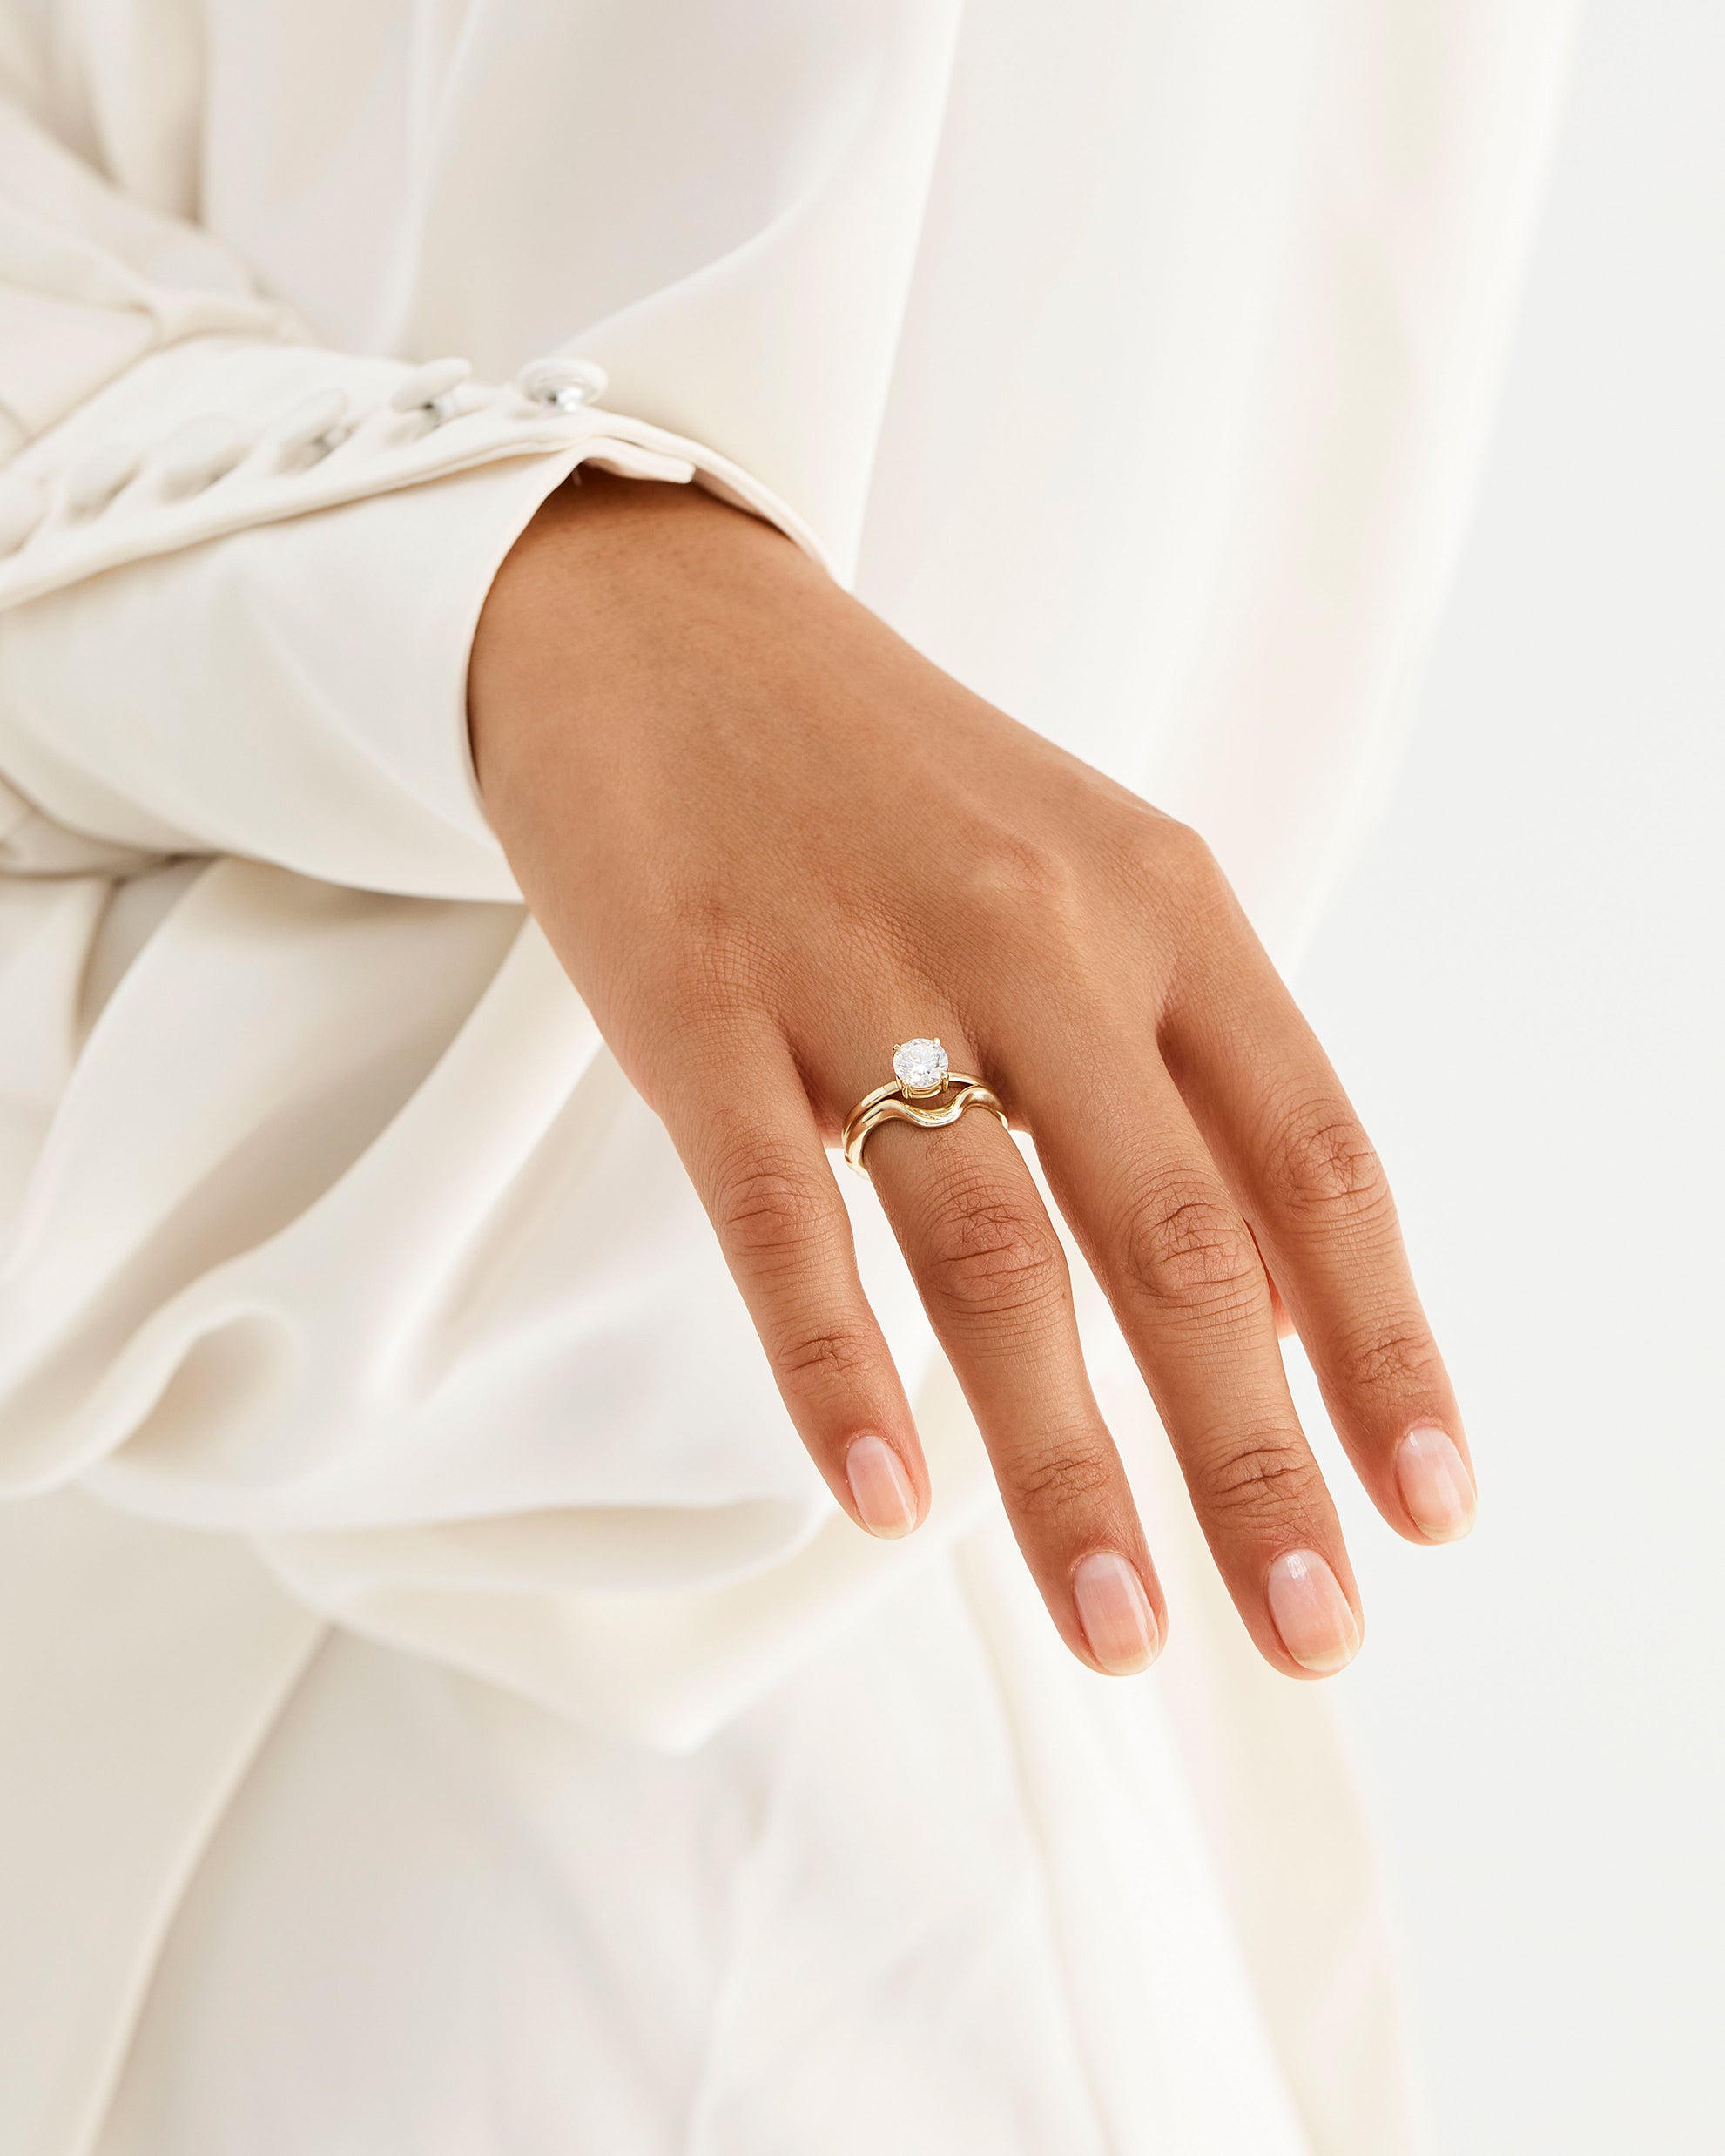 A model wears an organic inspired crown ring stacked with a solitaire style engagement ring